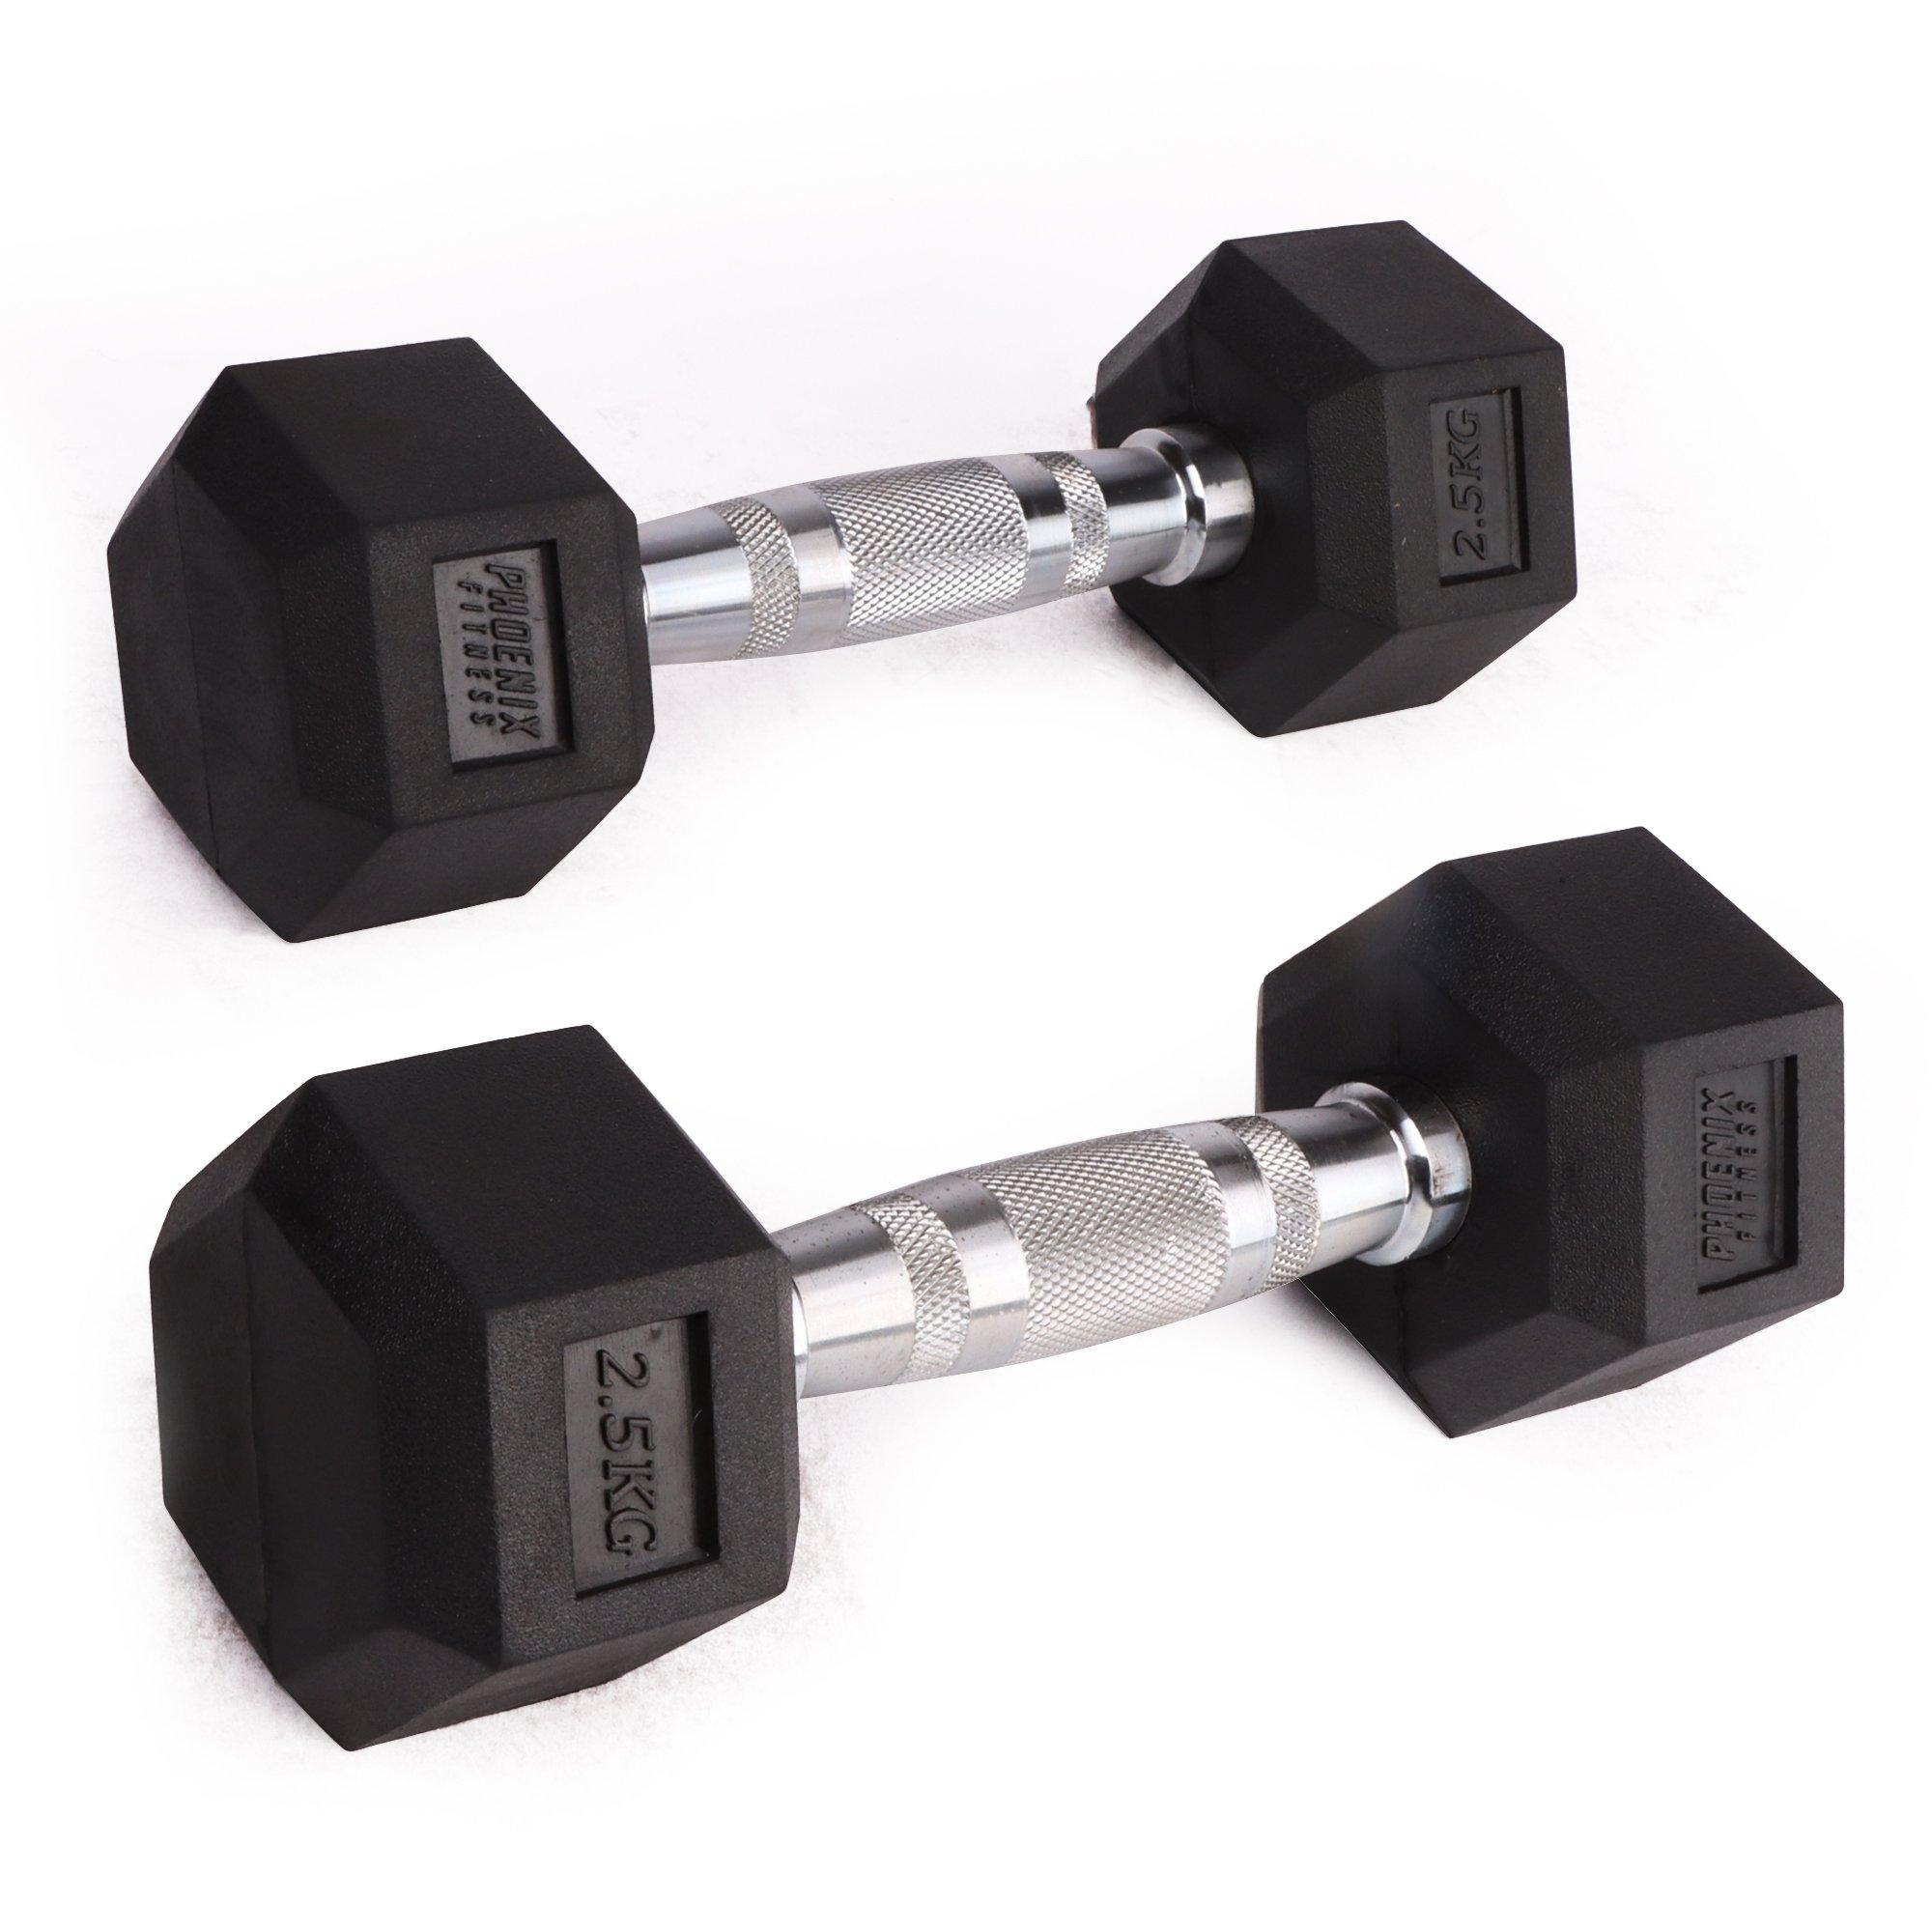 Rubber & Cast Iron Hexagonal Dumbbell Hand Weights at Home & Gym - PAIR - Choice of Weight: 2.5kg - 